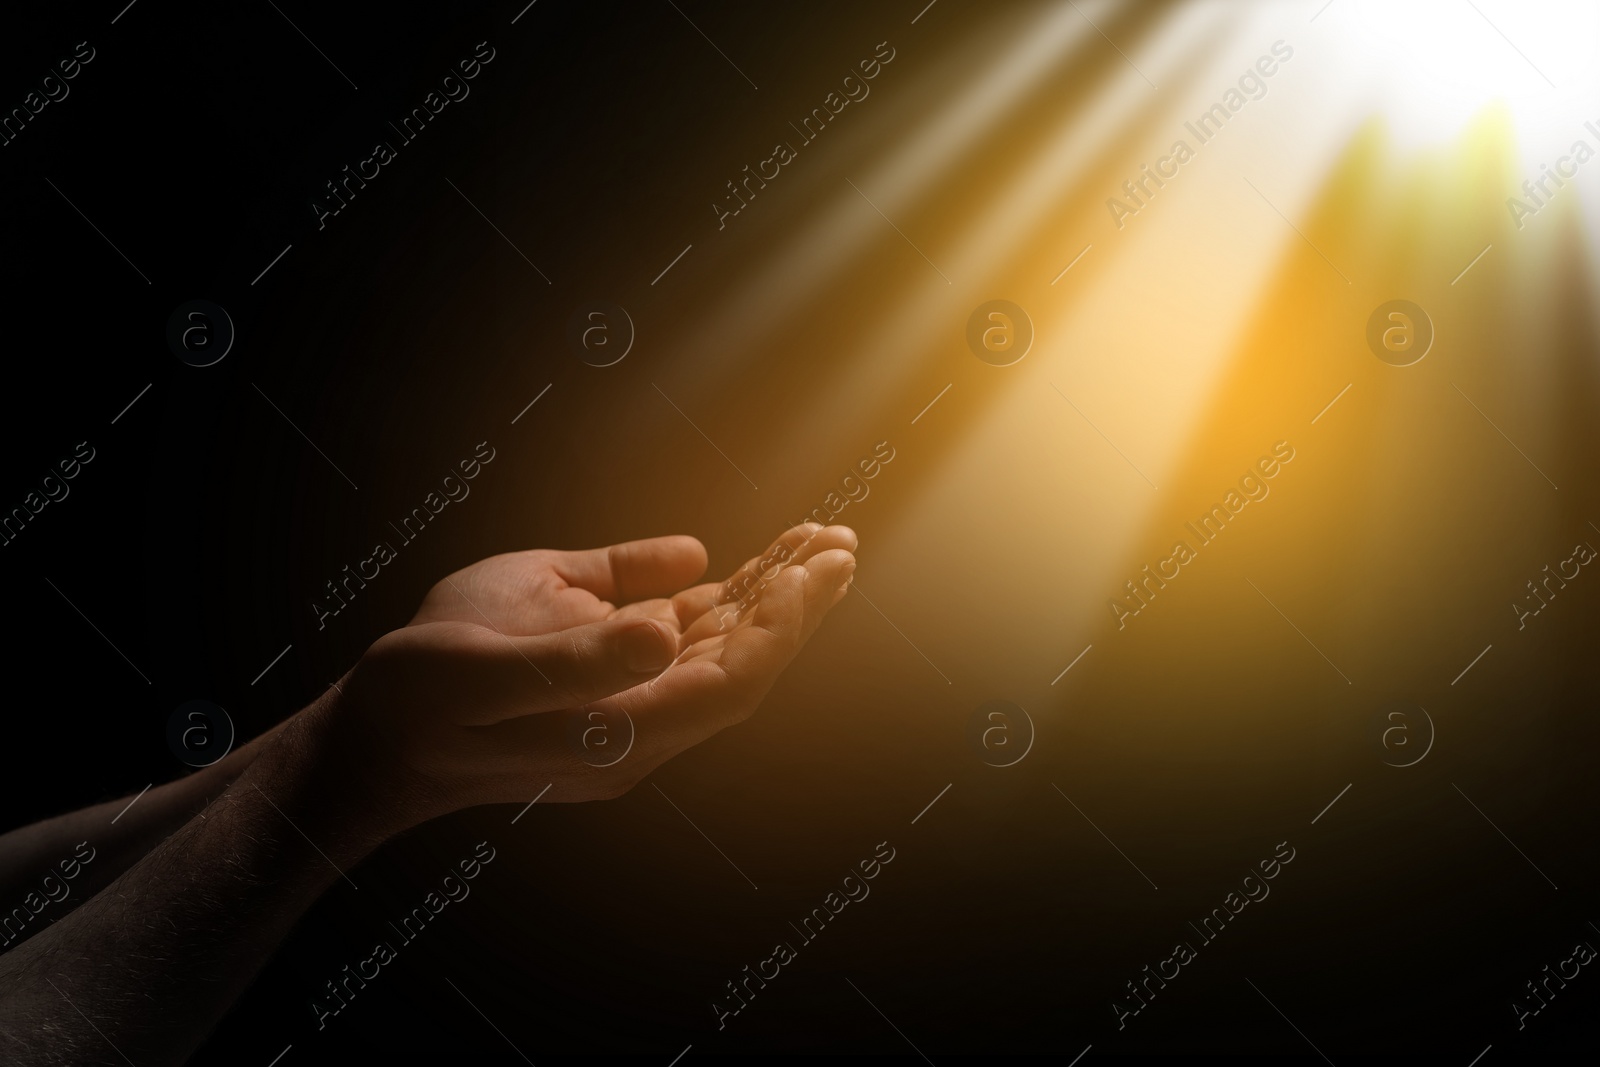 Image of Christian man stretching hands towards holy light in darkness, closeup. Prayer and belief